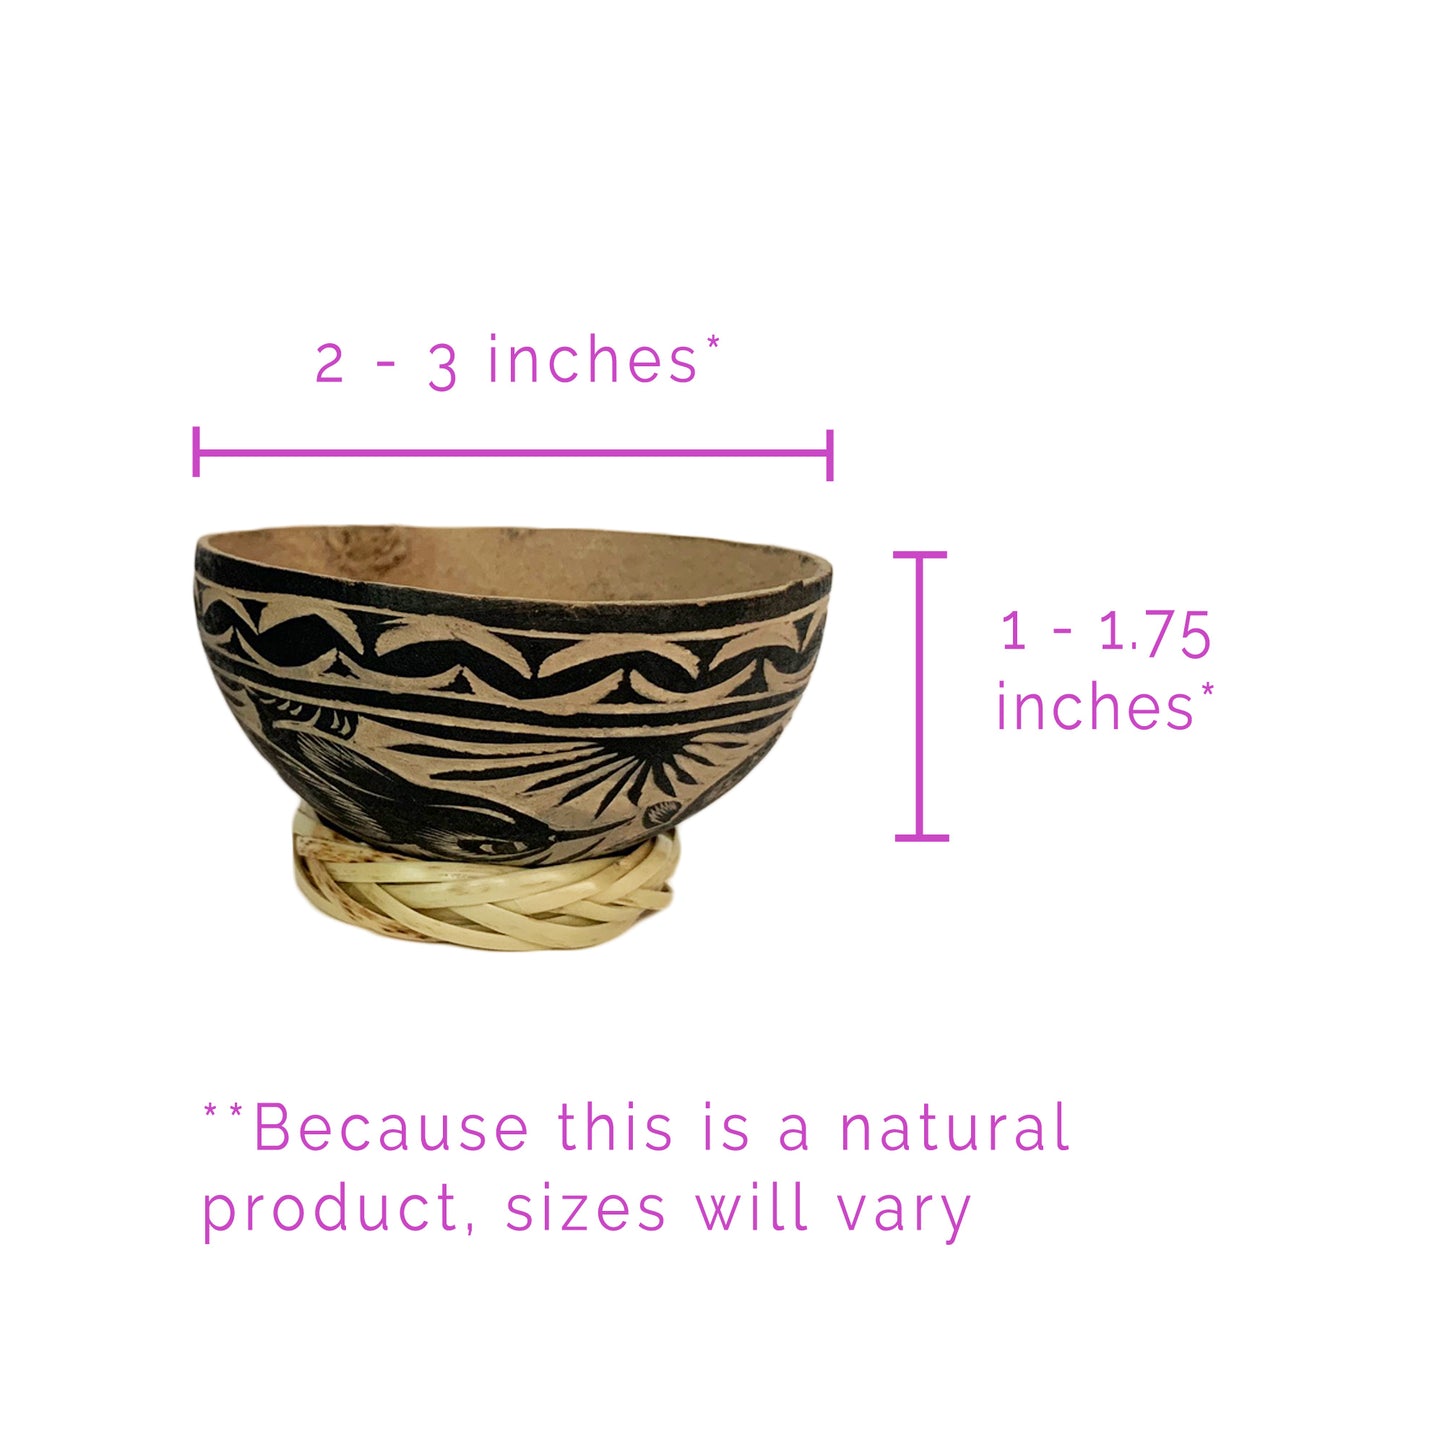 Mezcal Jicaras (Small, Shot Glass Size) - Holds 2-3 Ounces - Hand-carved from Mexico with Natural Fiber Base